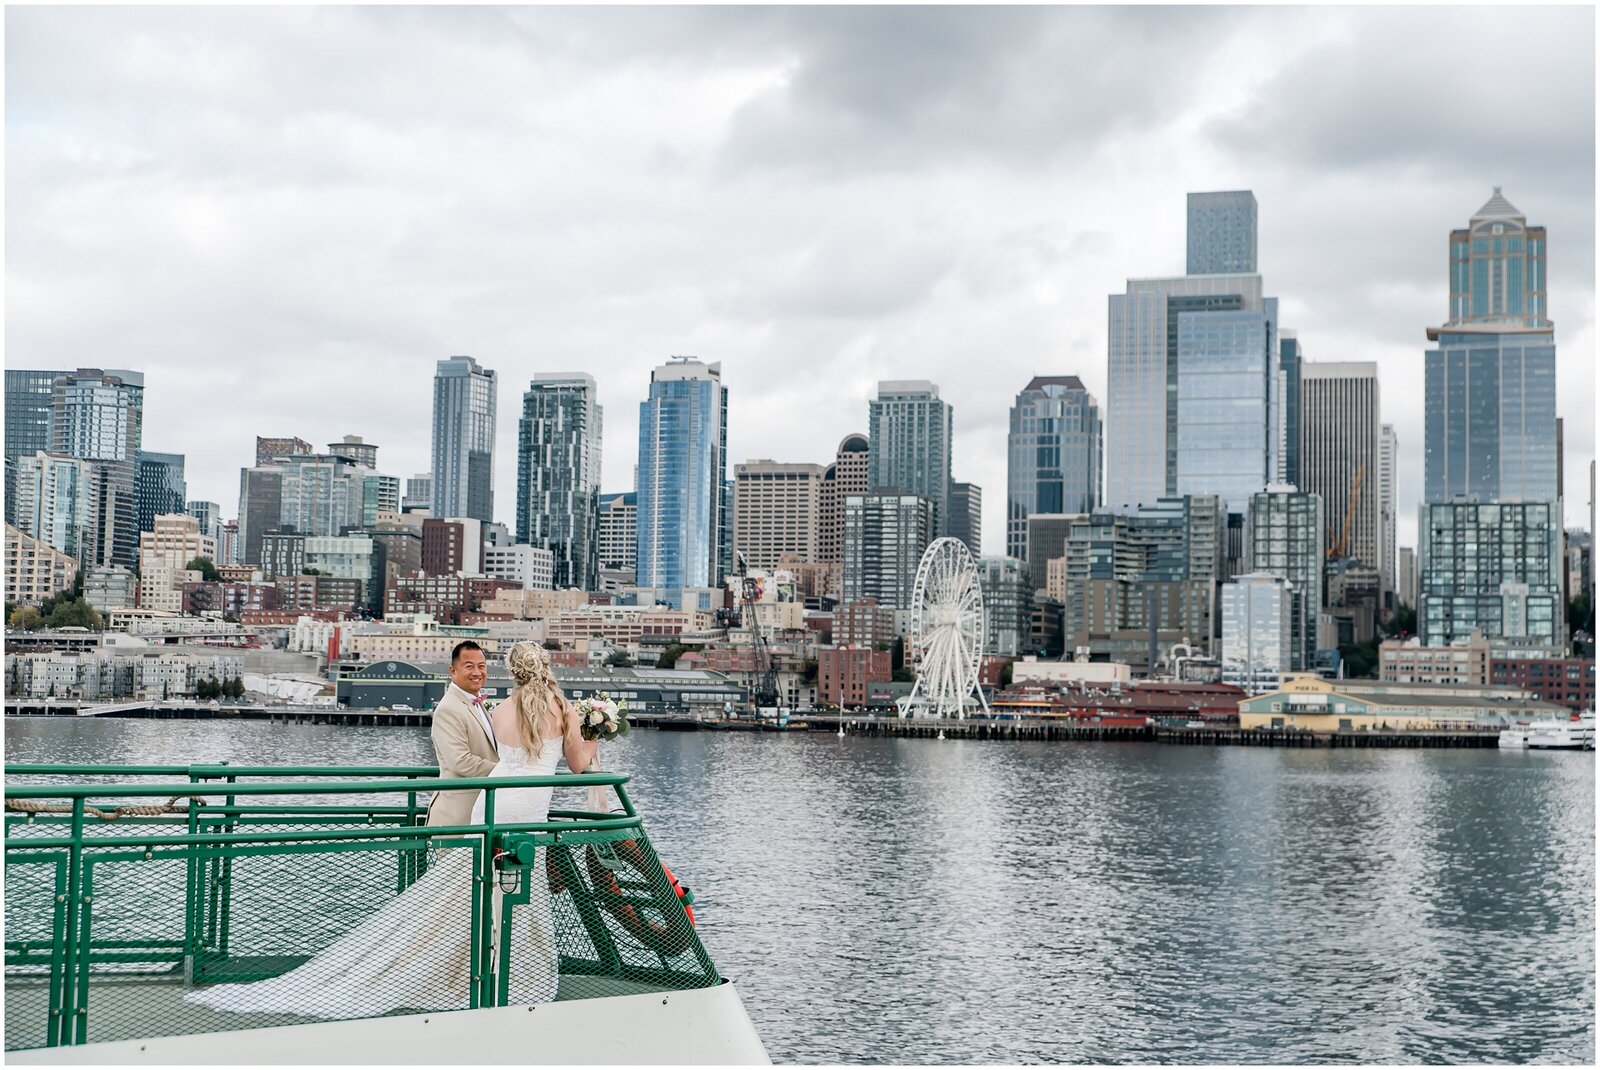 Bride and groom on boat with city skyline behind them